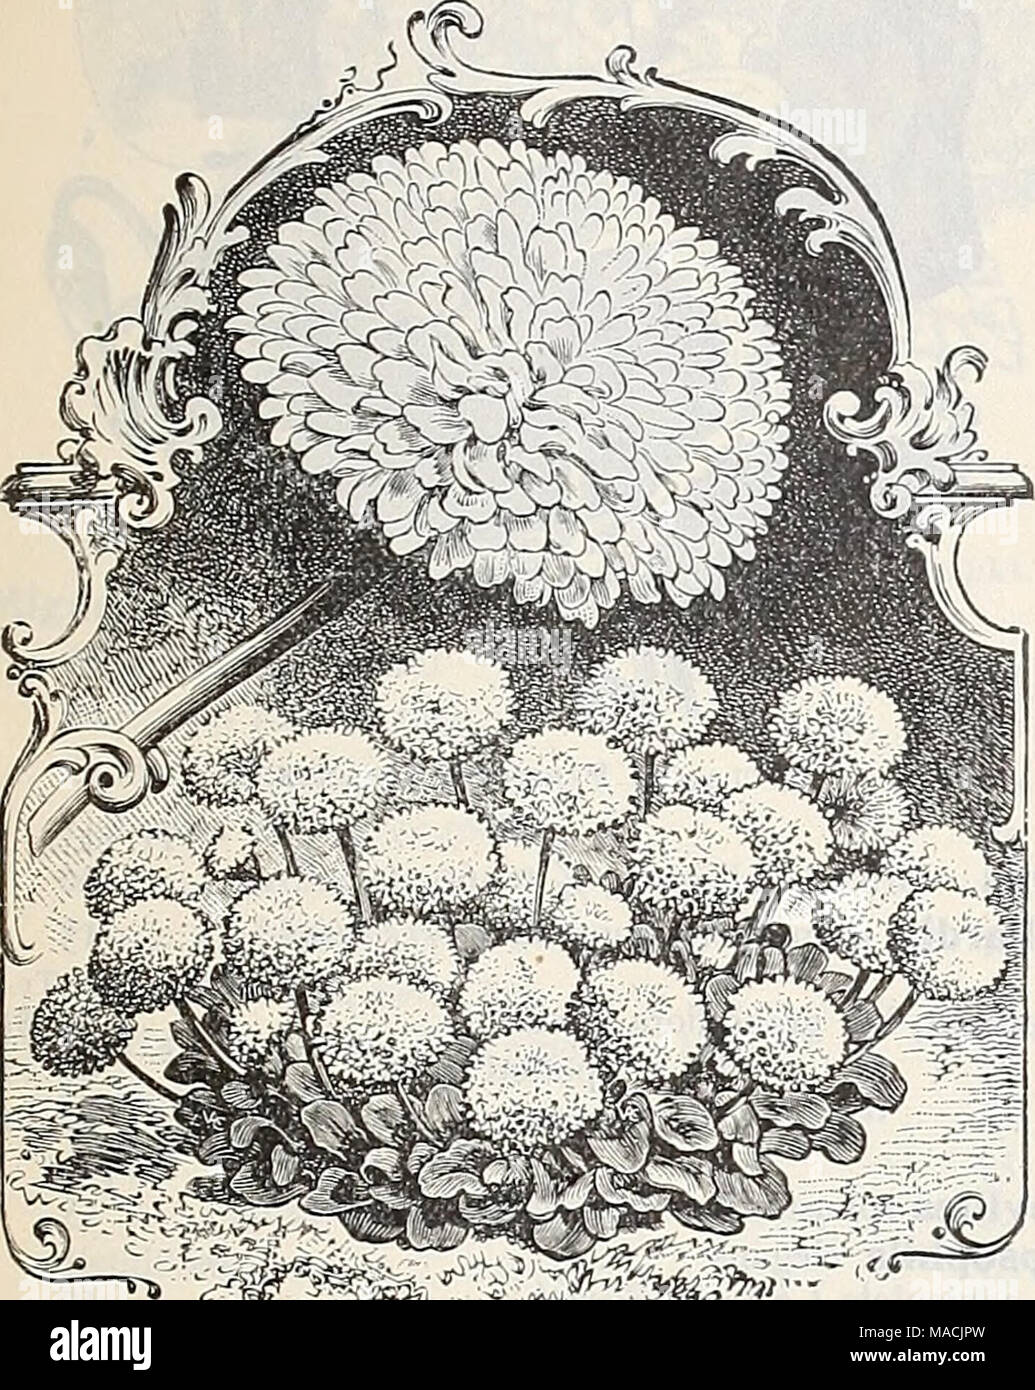 . Dreer's wholesale price list autumn edition September 1899 December : bulbs plants flower and vegetable seeds for fall ... planting implements, fertilizers and requisites . Bellis Peeennis. Double Snowball. .,;P^y^X*Nir;^ Achillea ptarmica, double white, hardy . Alyssum maritimum (Sweet Alyssum) lb. $1.40 Tom Thumb, dwarf, compact, lb. $2.00 . Little Gem, &quot; White Carpet,&quot; very dwarf. saxatile compactum, yellow perennial . . Ampelopsis Veitchii (Boston or fapanese Ivy) lb. $1.50 Antirrhinum majus, mixed, extra fine strain . Firefly, bright red Queen of the North, white Niobe, whit Stock Photo